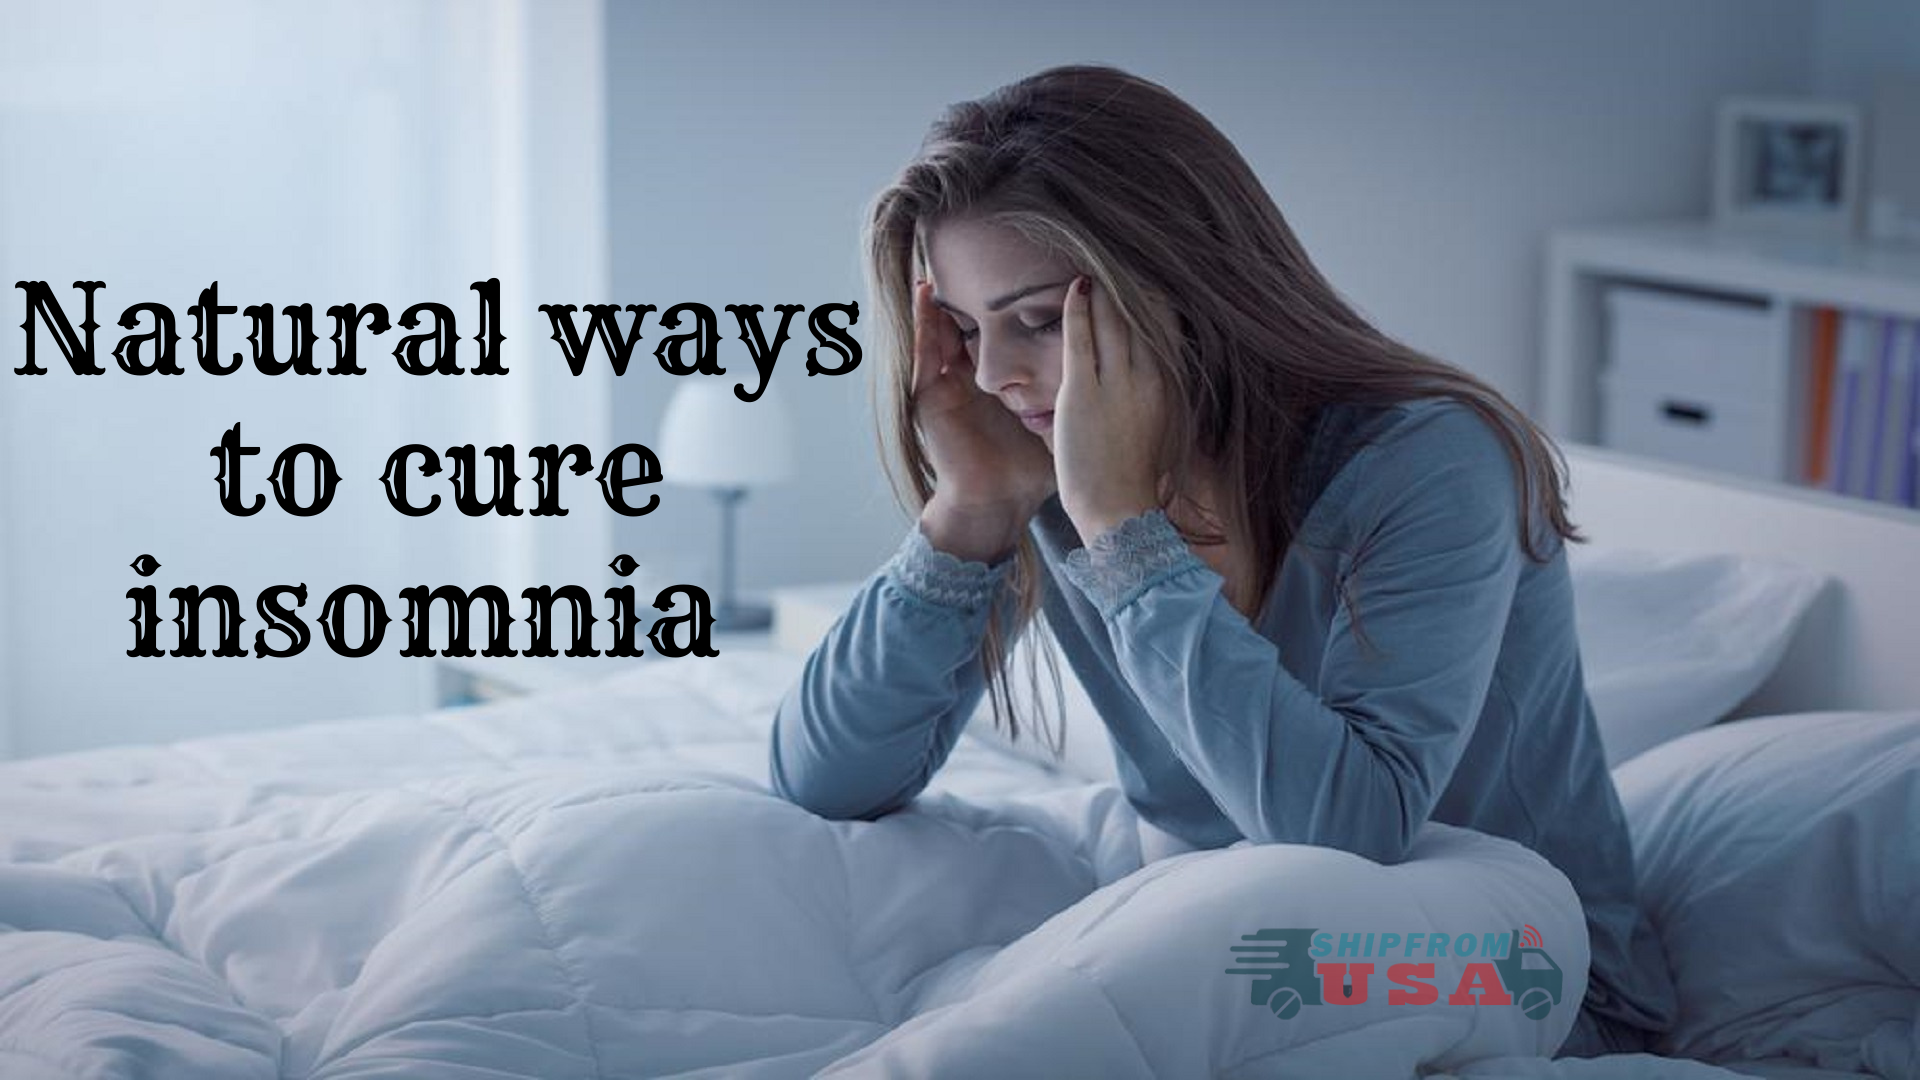 Natural ways to cure Insomnia